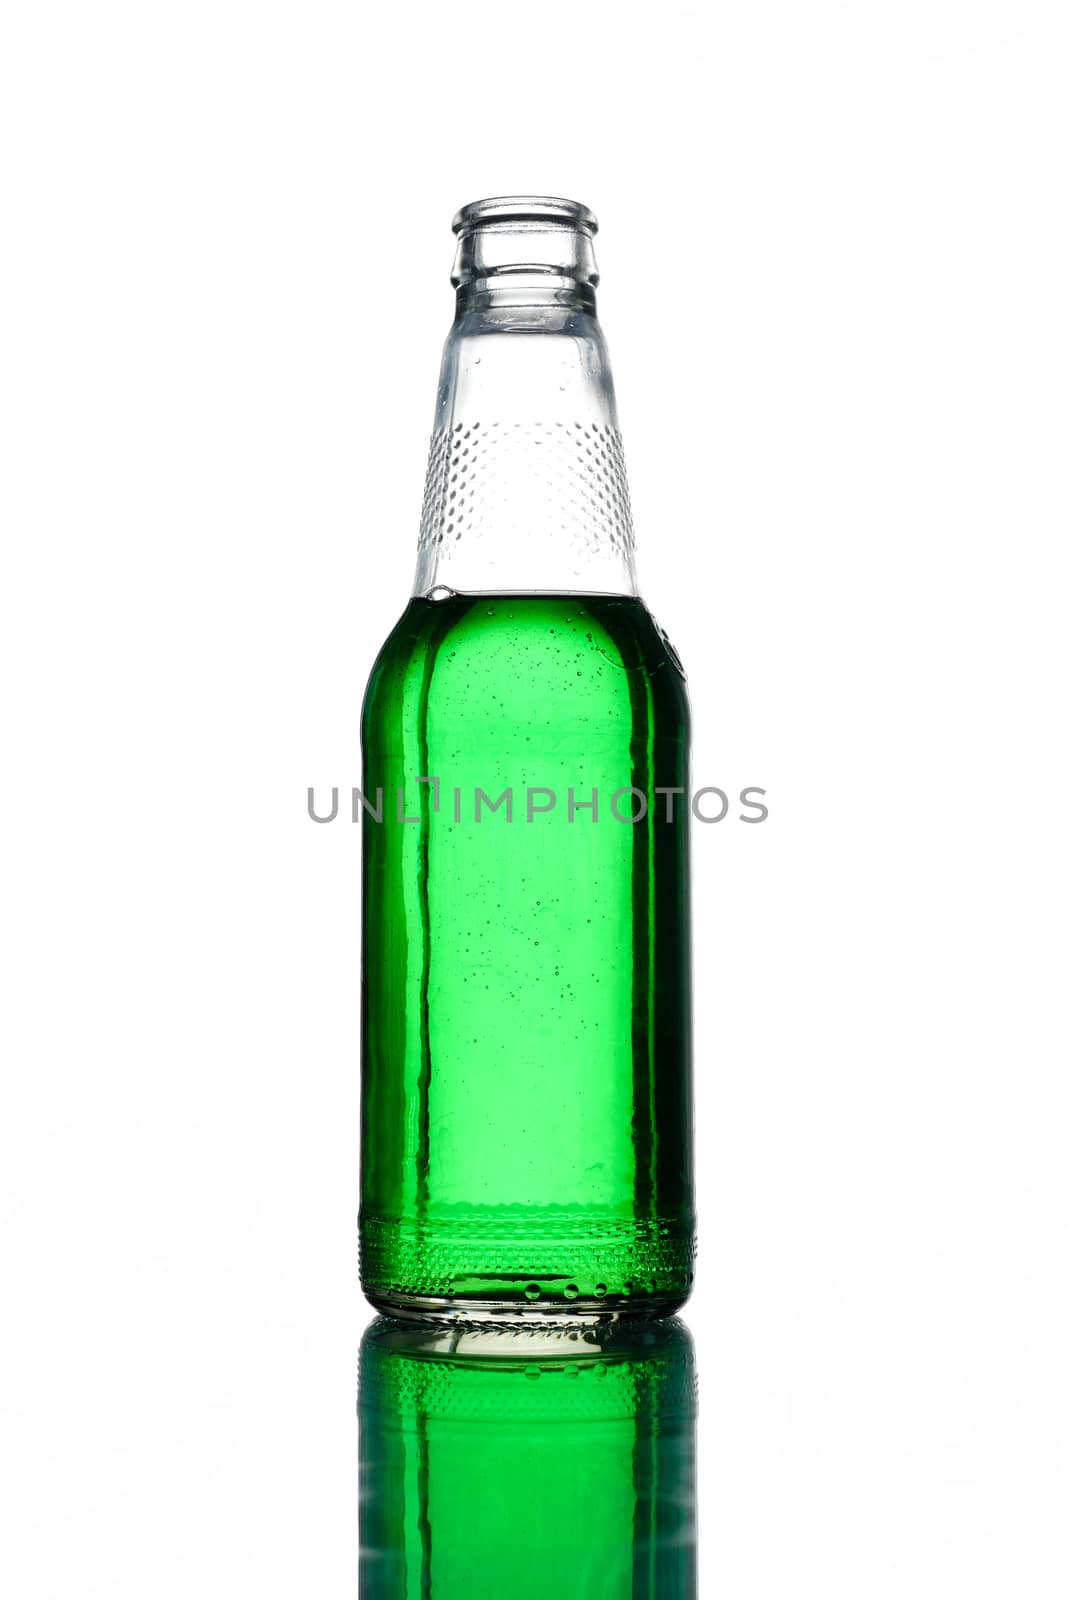 Bottle of green liquid isolated on white background